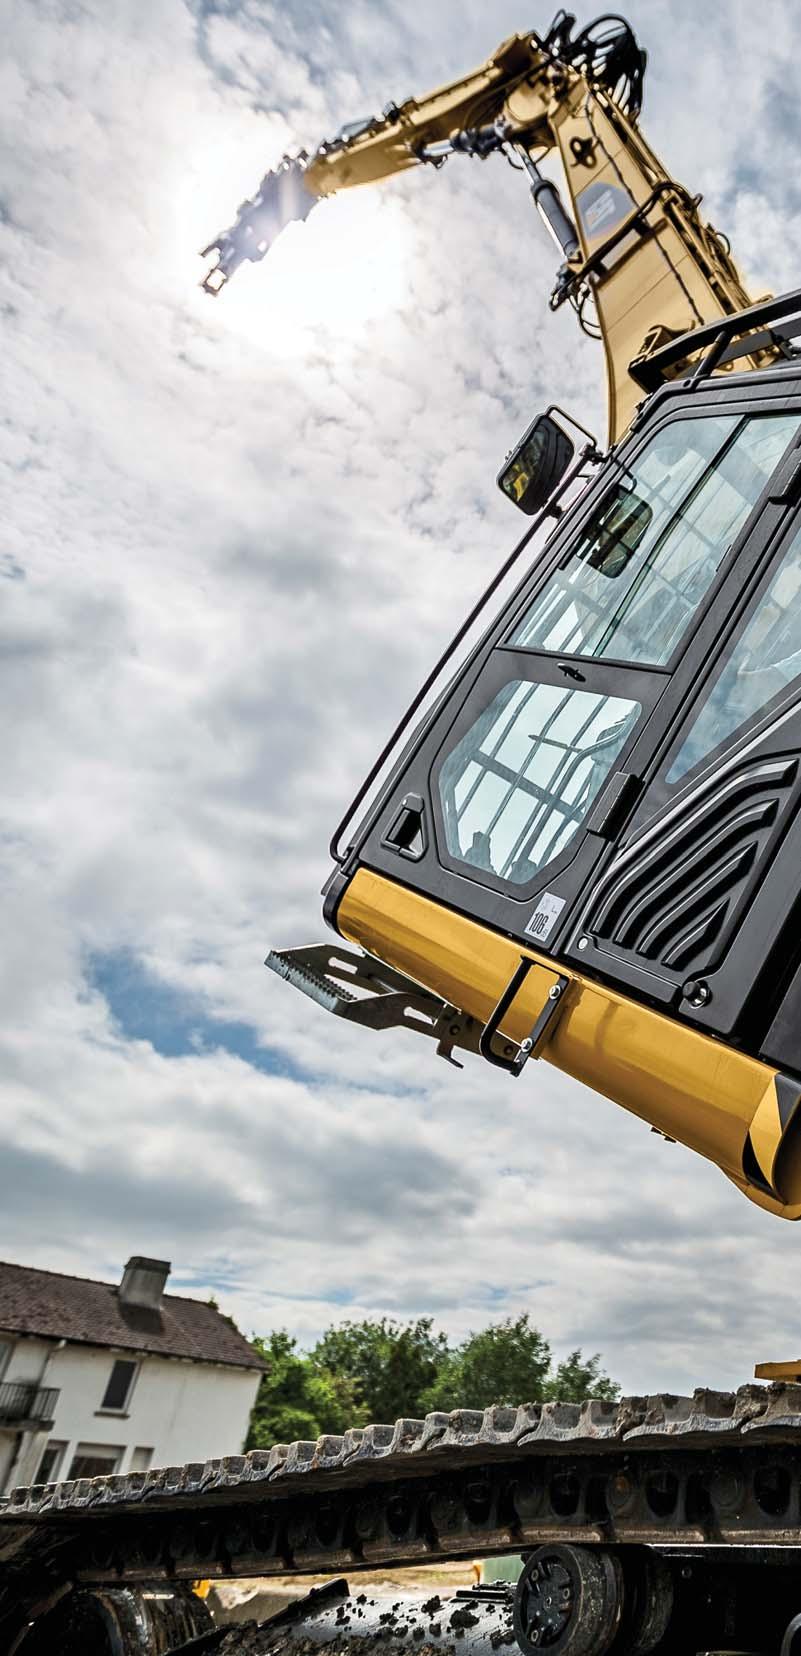 The 340F UHD is the new high reach demolition machine designed and manufactured by Caterpillar, distributed through the Cat dealer network, offering the same warranty and unmatched product support as